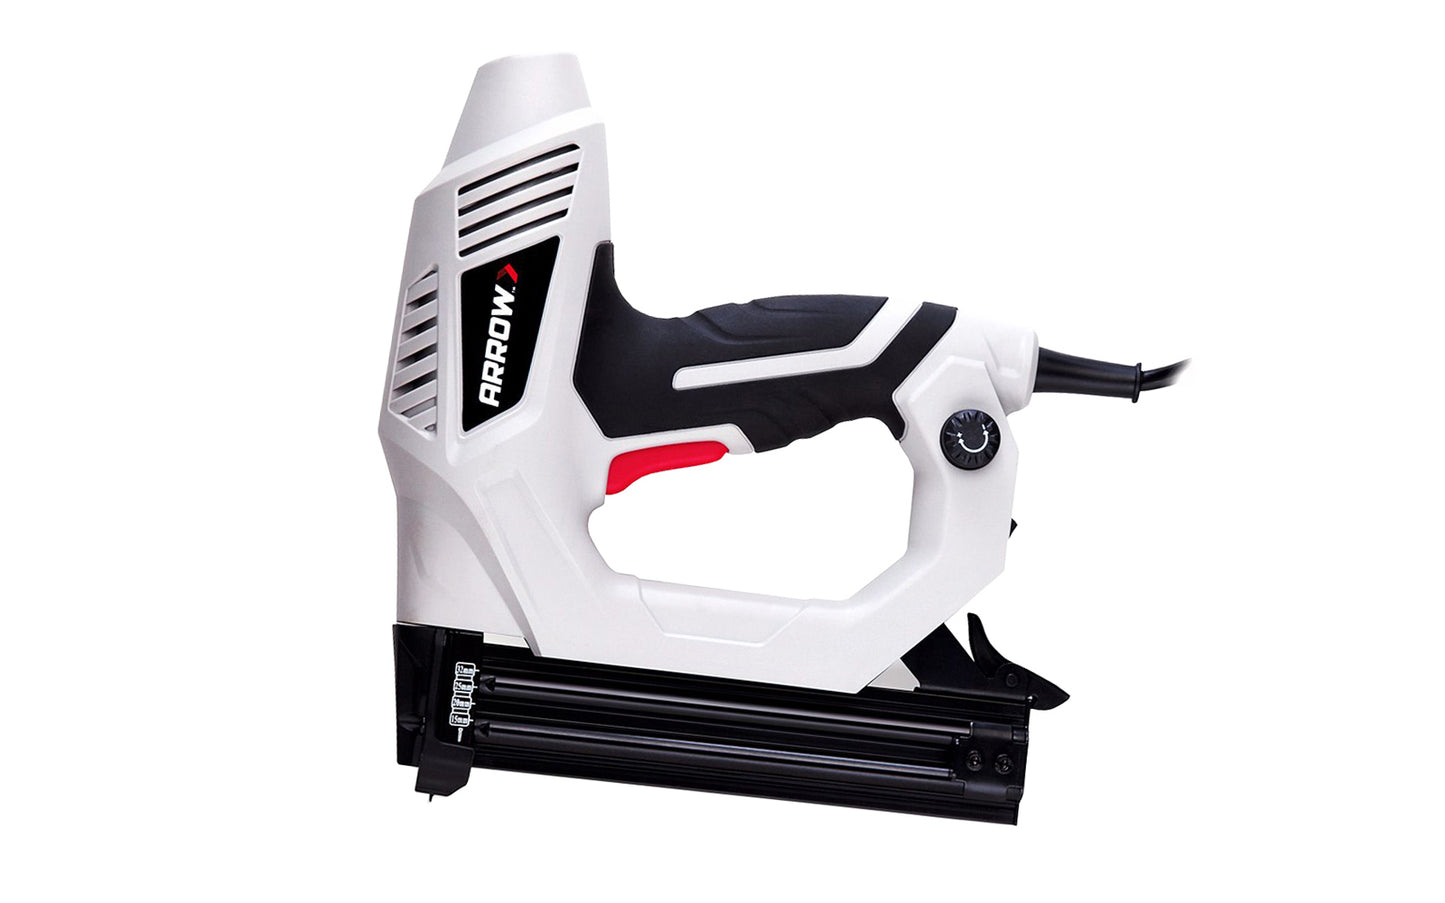 Arrow Professional Electric Nailer ~ ET200BN. Tool’s adjustable depth control knob allows the operator to set the correct amount of power, matching the size of the brad nail & the materials being nailed together. Good for general repairs, wood trim & lattice work, 6' power cord. Use Arrow 18GA Brad Nails. 079055200857